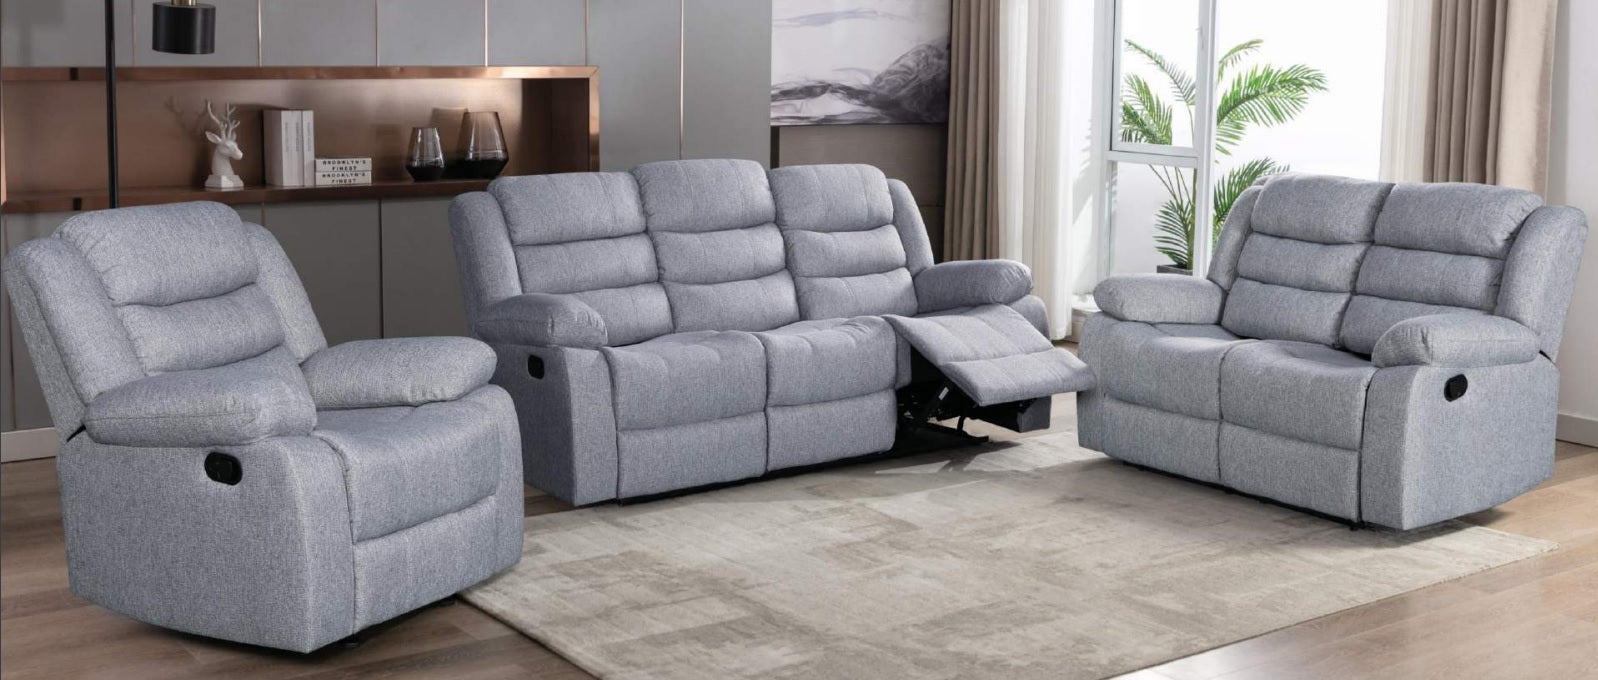 1109 - 3Pc Recliner Set - Sofa, Loveseat and Chair in Tampere Smoke